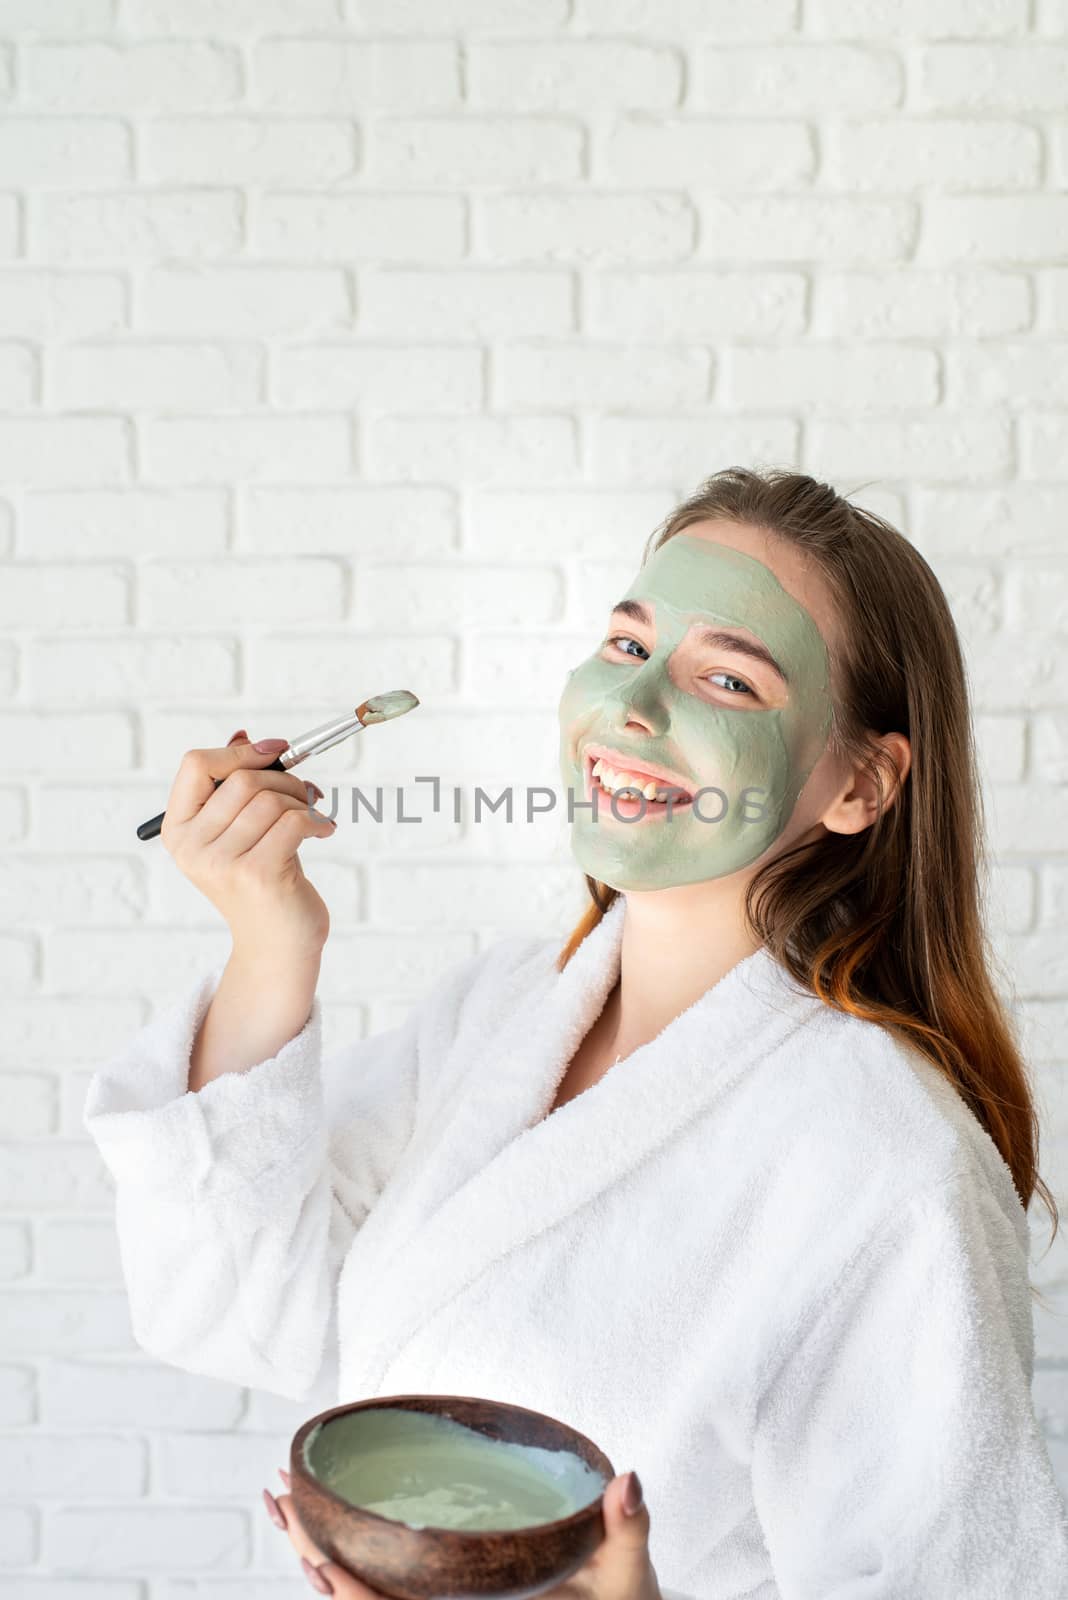 Spa and wellness. Natural cosmetics. Self care. Young smiling caucasian woman wearing bathrobes appplying clay face mask making funny face